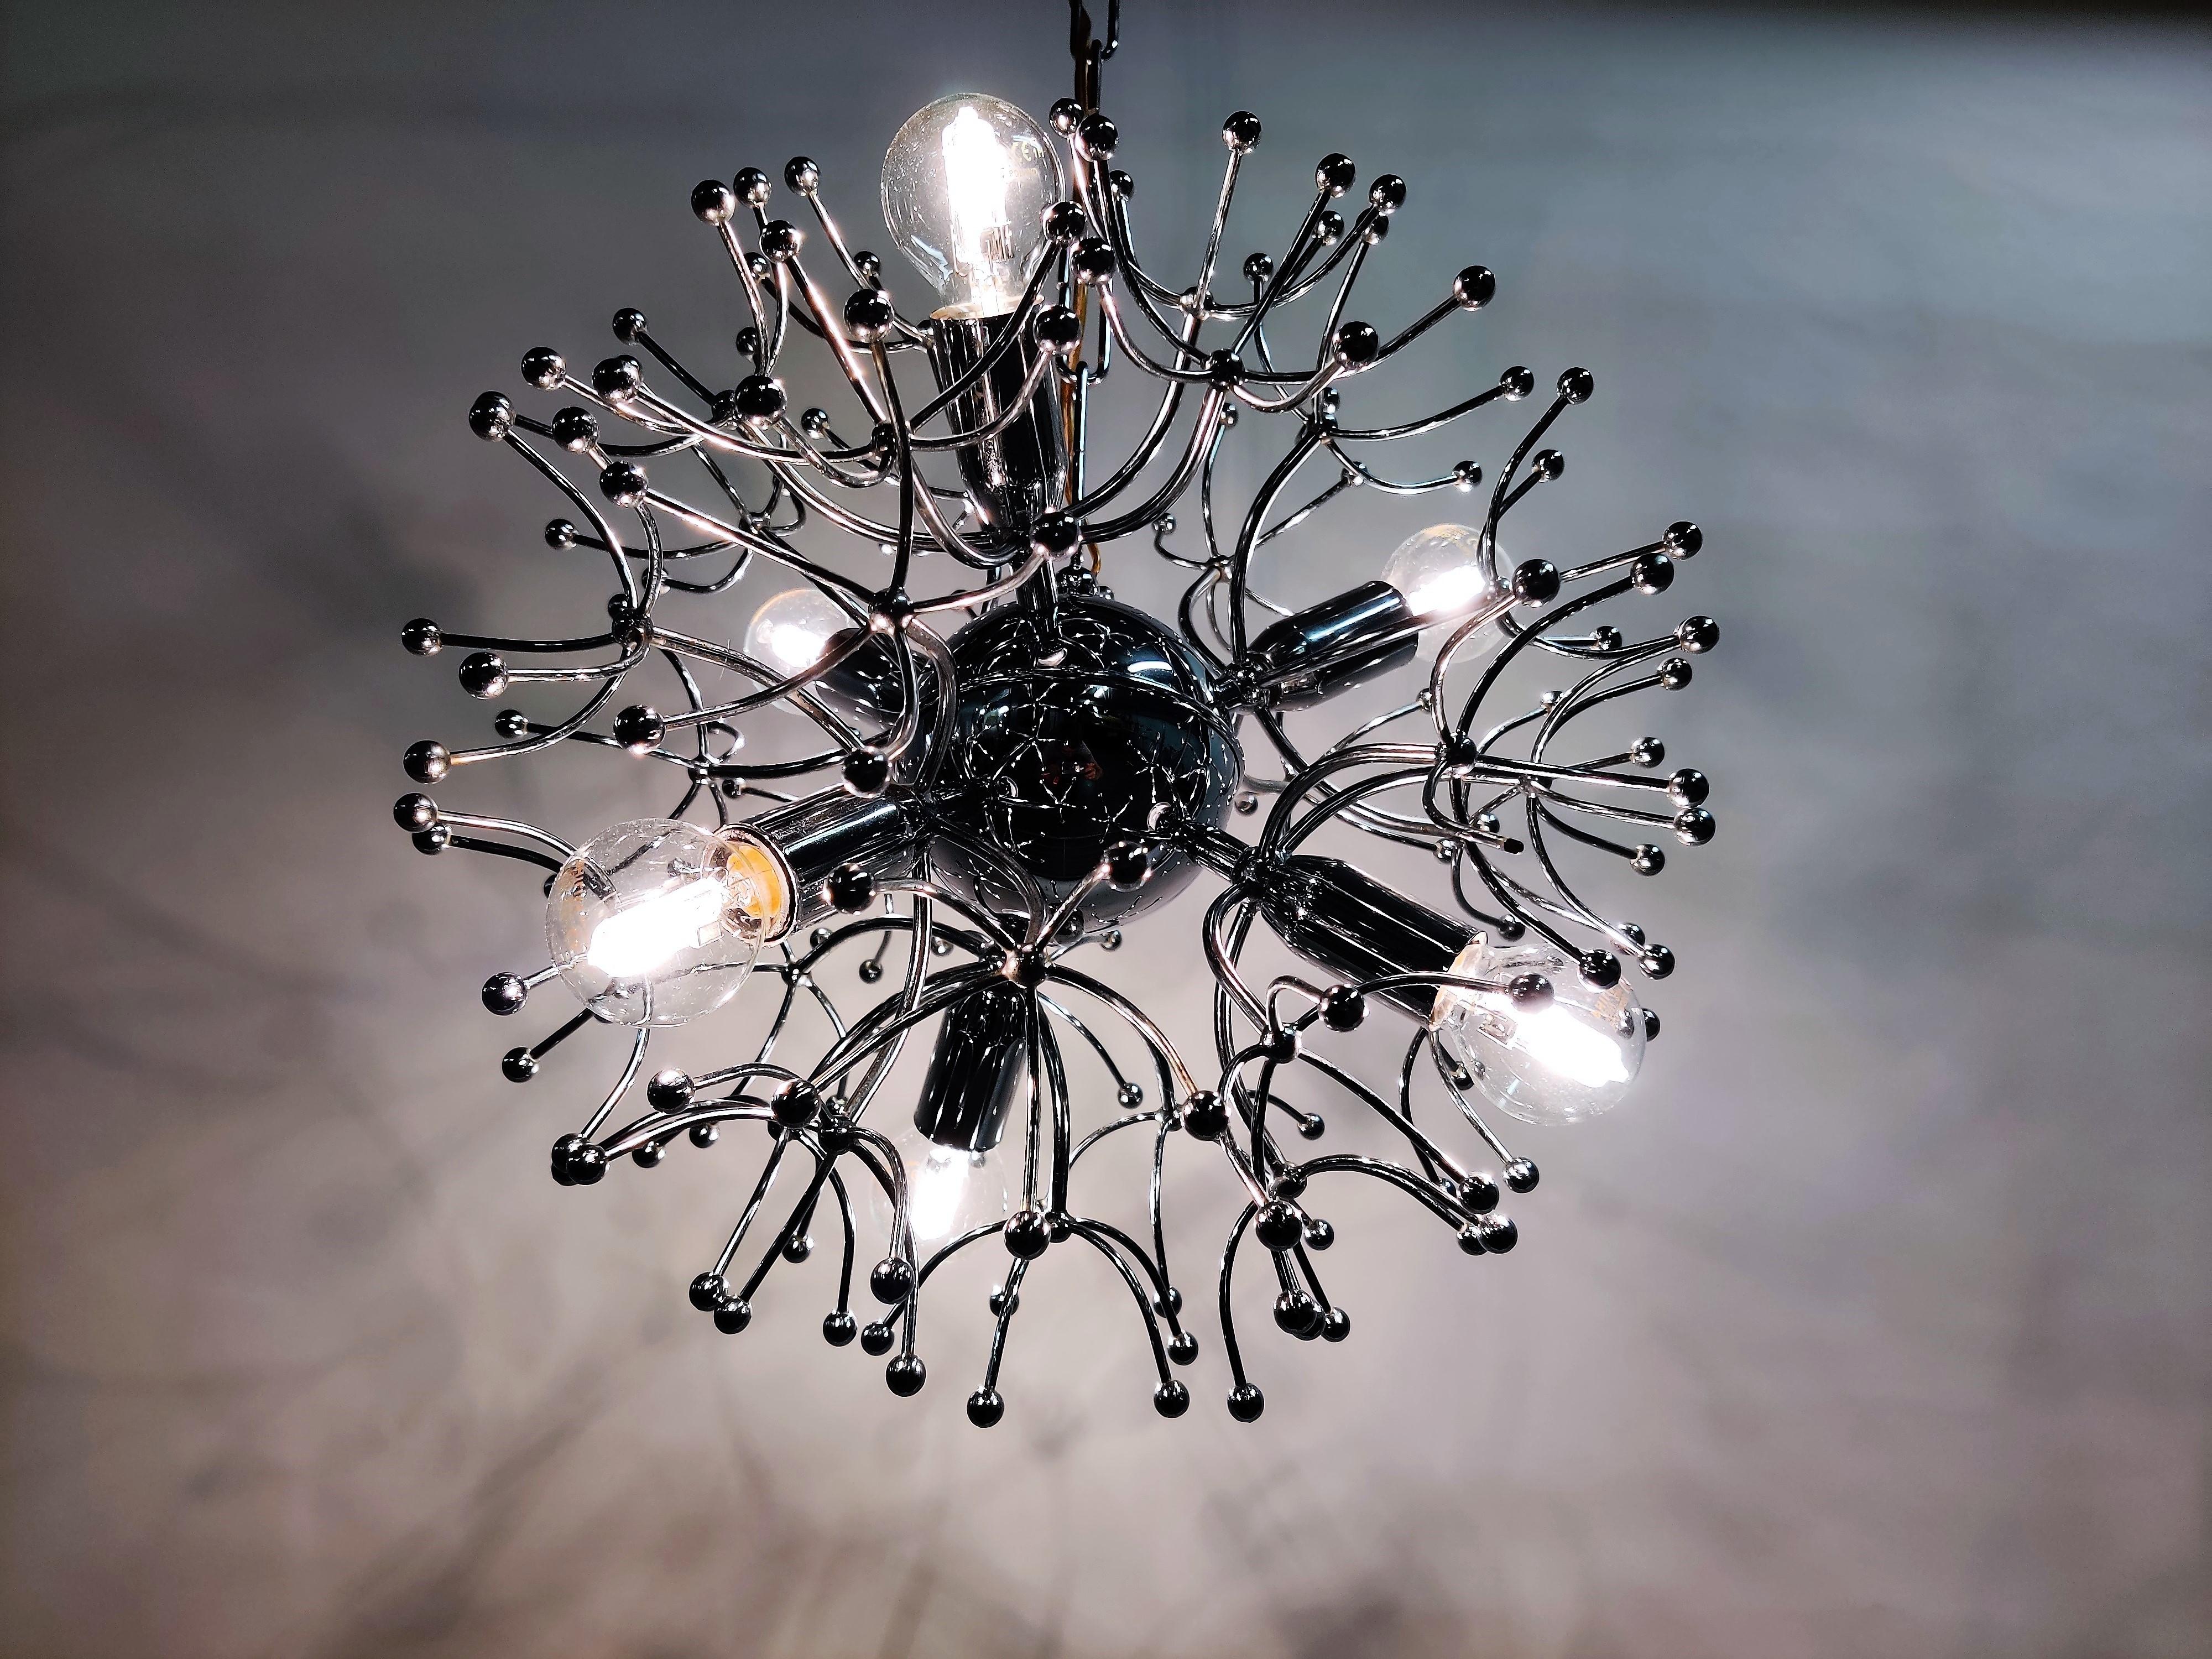 Midcentury chrome sputnik chandelier by Gaetano Sciolari featuring 6 lights.

The lamp emits a spectacular light.

Light patina visible.

Tested and ready for use with regular E14 light bulbs. The chandelier is compatible for all